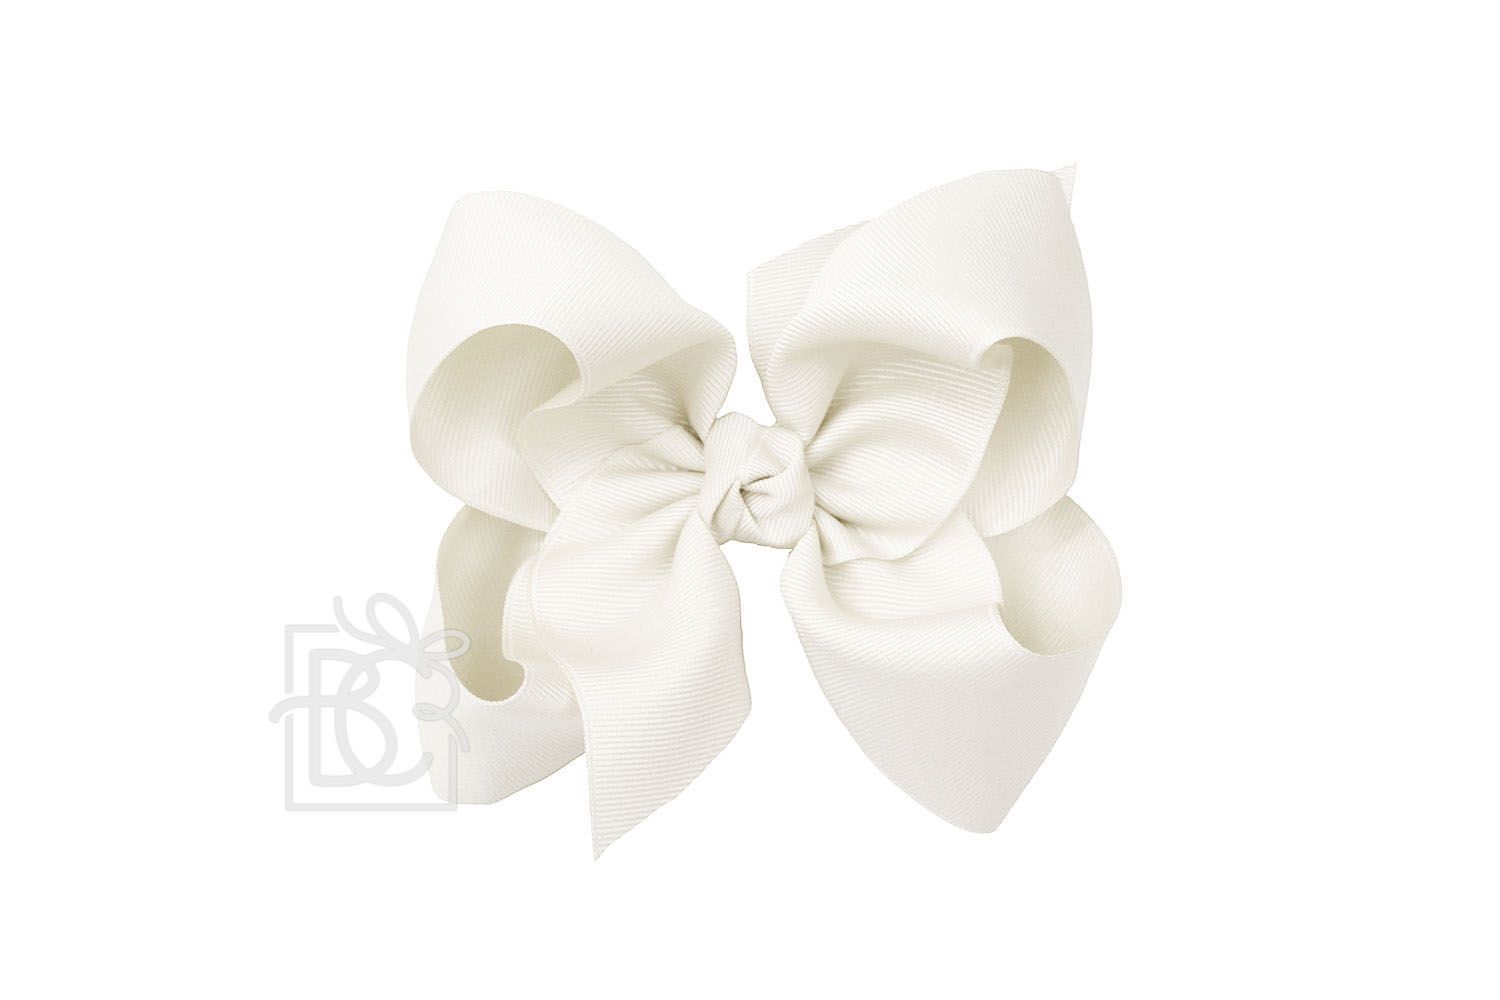 Beyond Creations - Hair Bows and Accessories - Huge 5.5